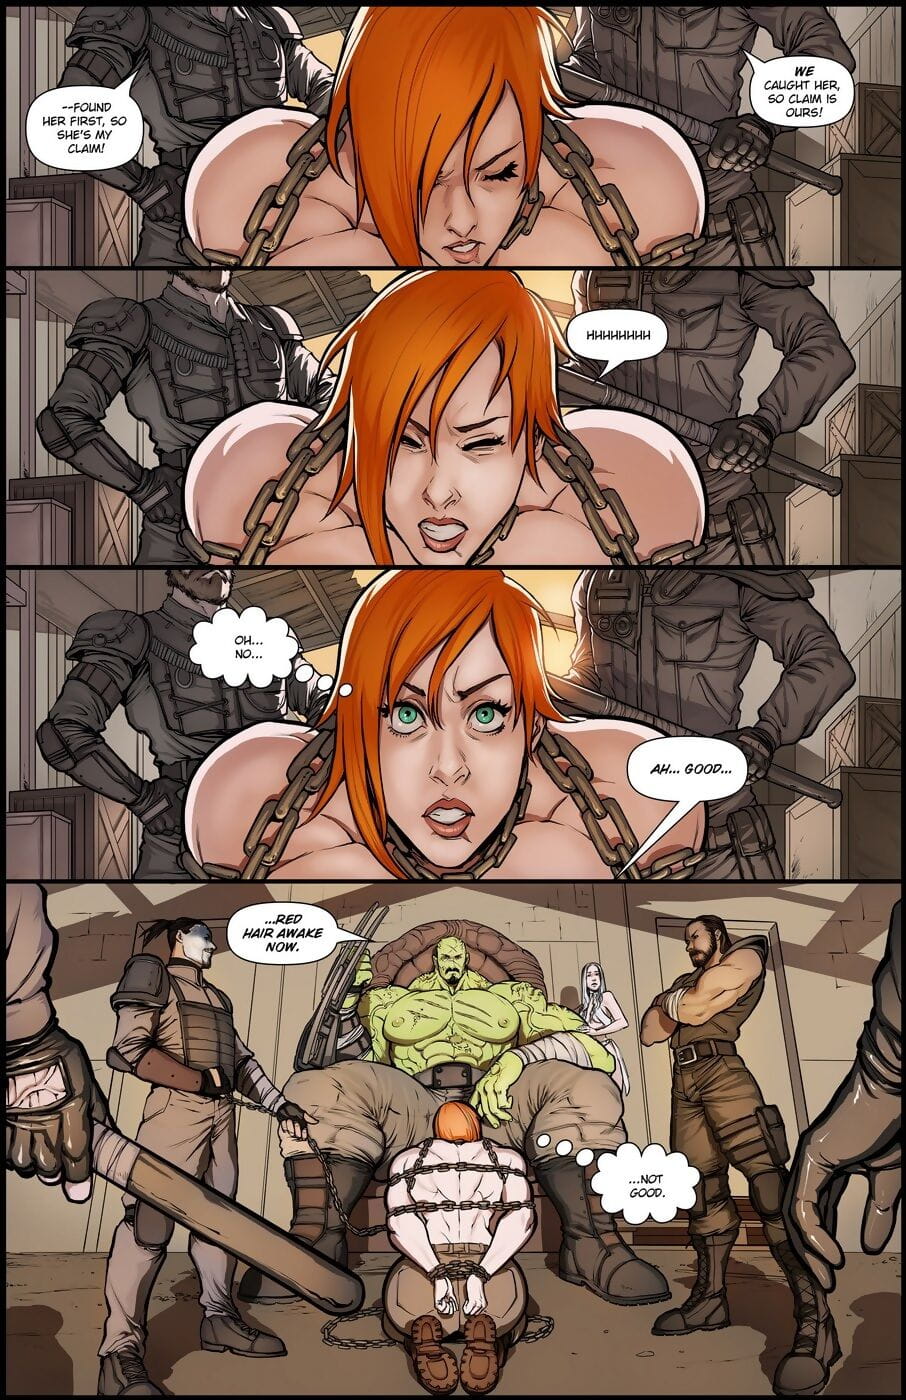 MuscleFan- The Strong Shall Survive Issue 03 page 1